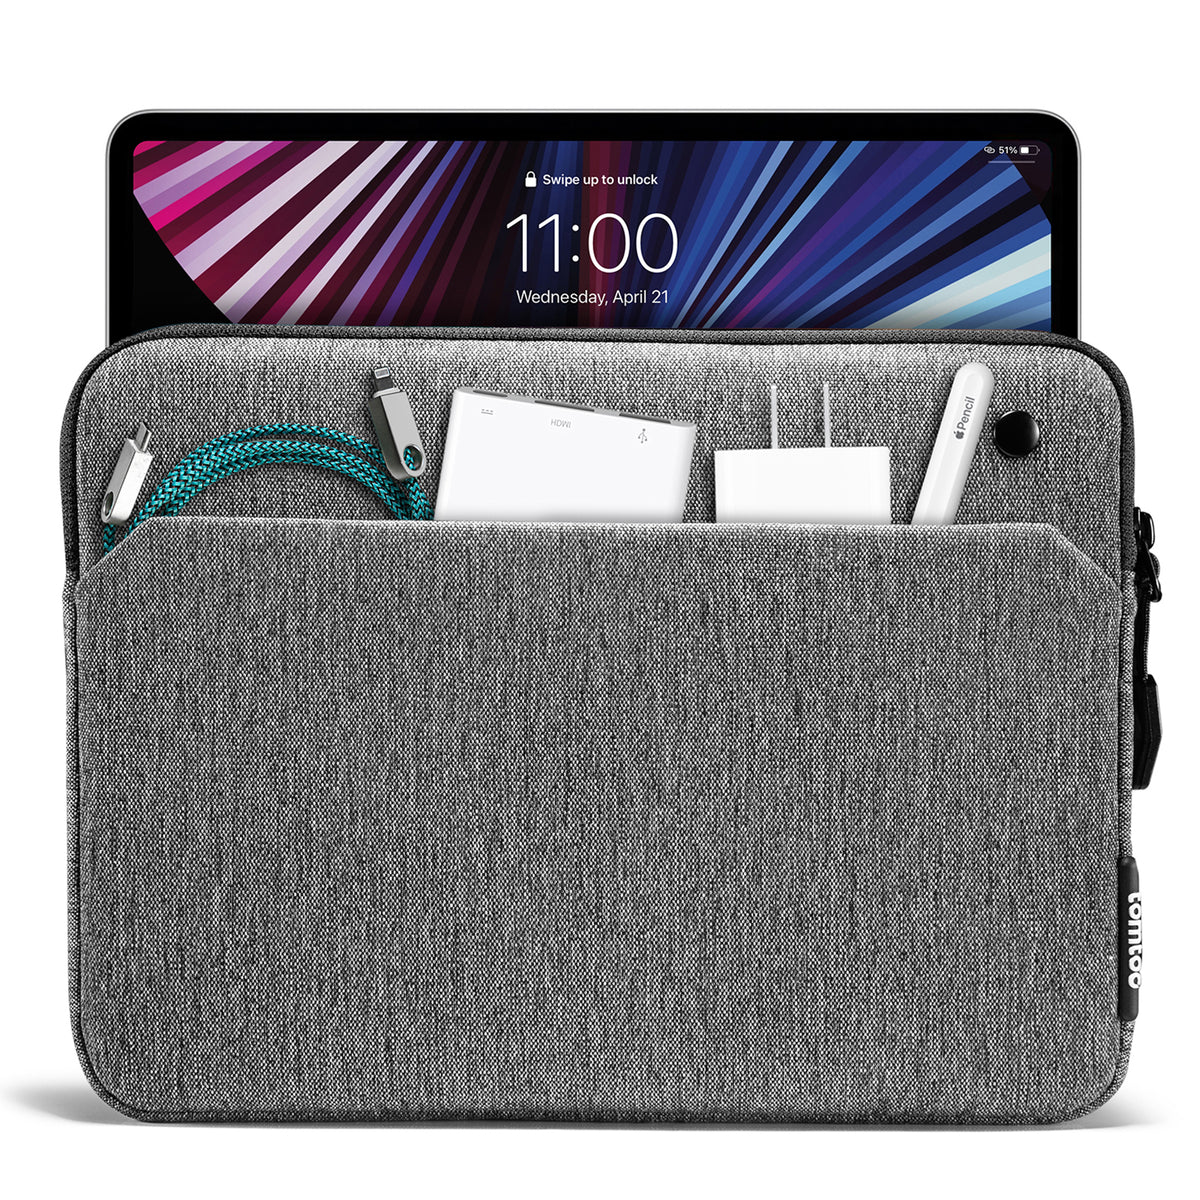 secondary_Basic-A18 Tablet Sleeve for 11